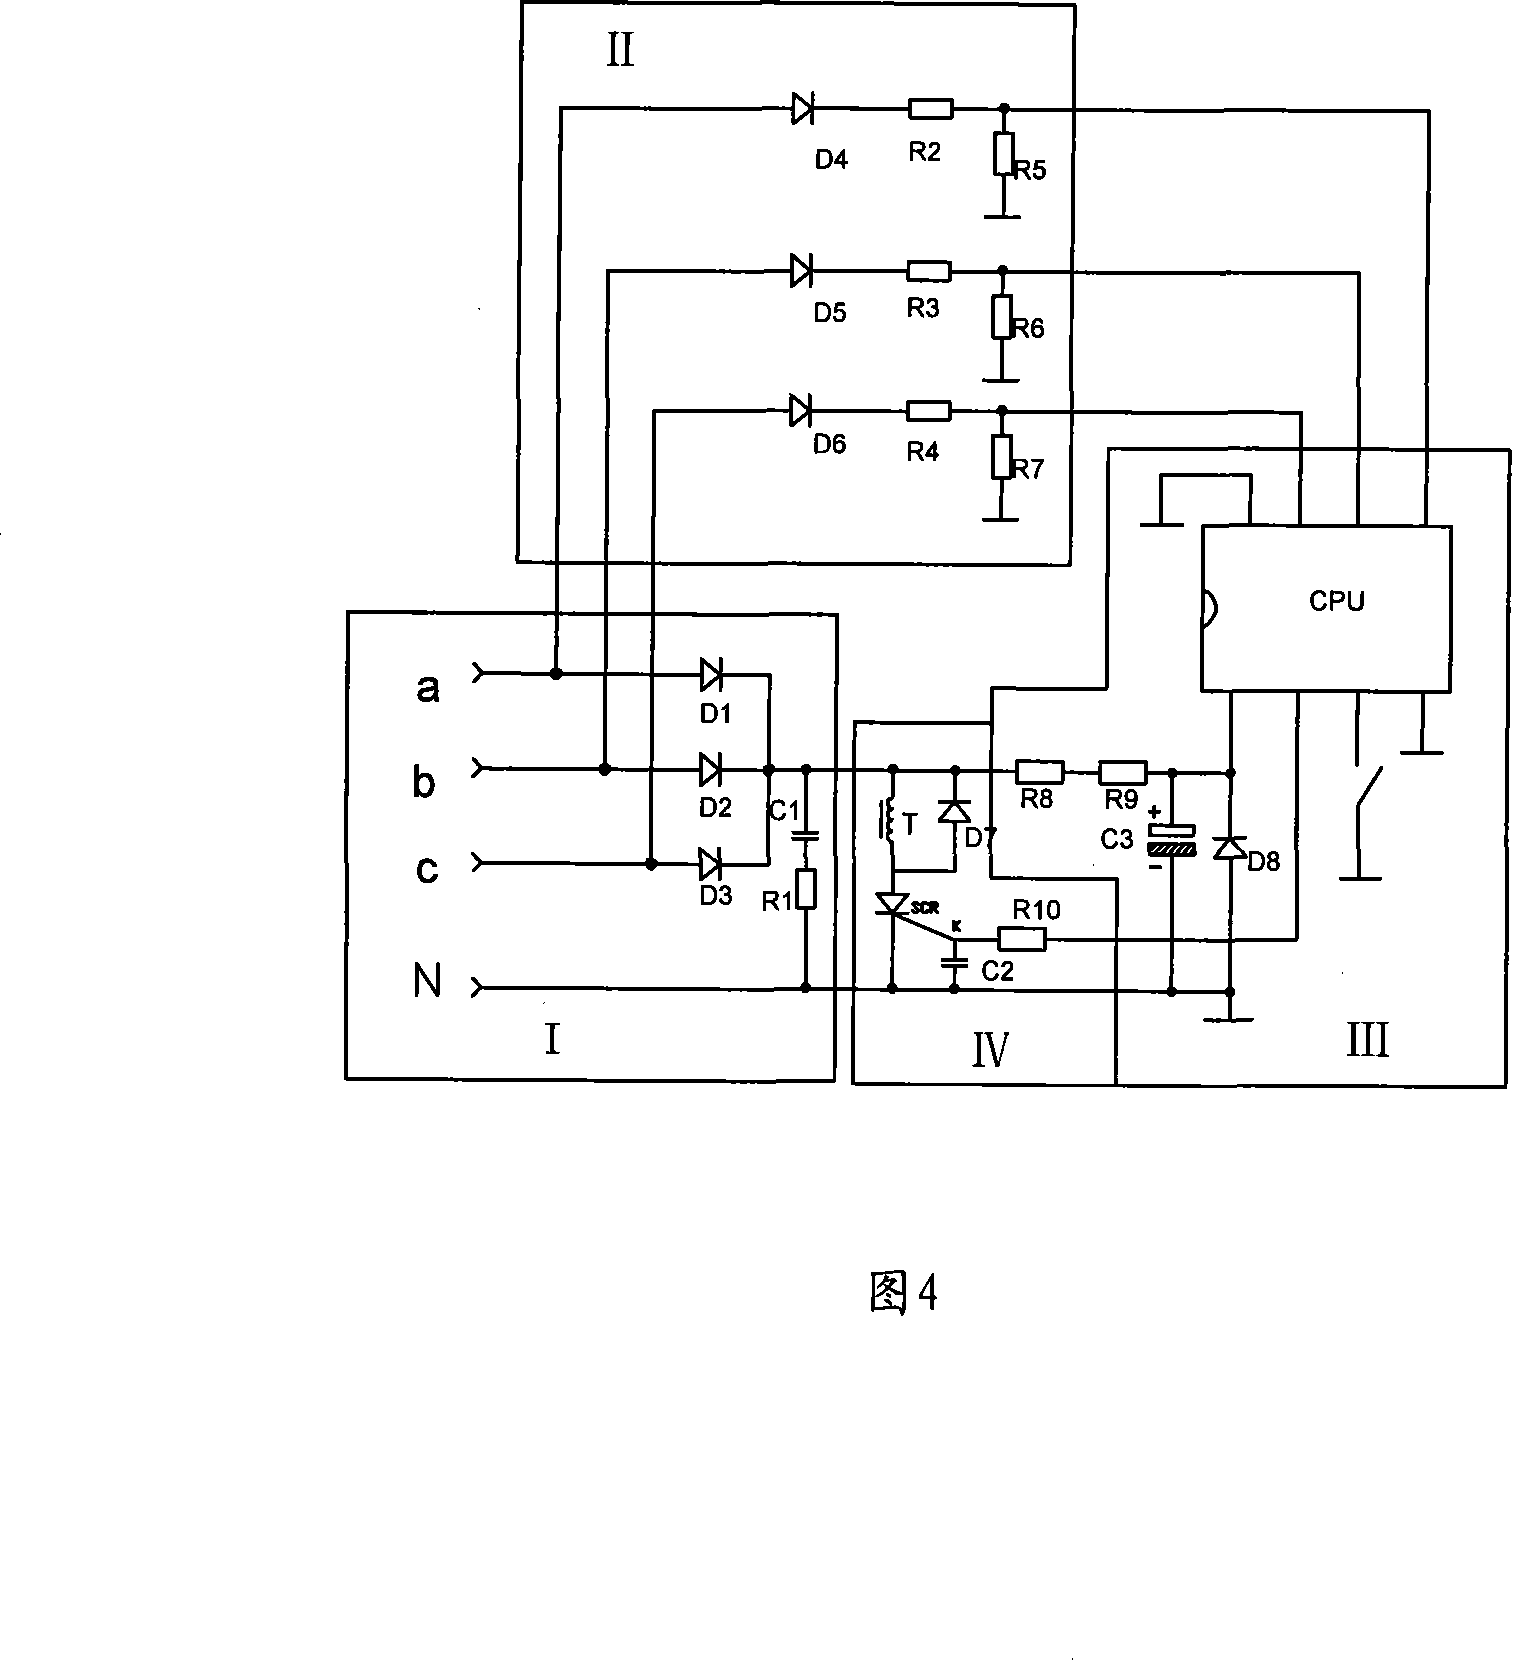 Low-voltage breaker with high voltage open-phase protection